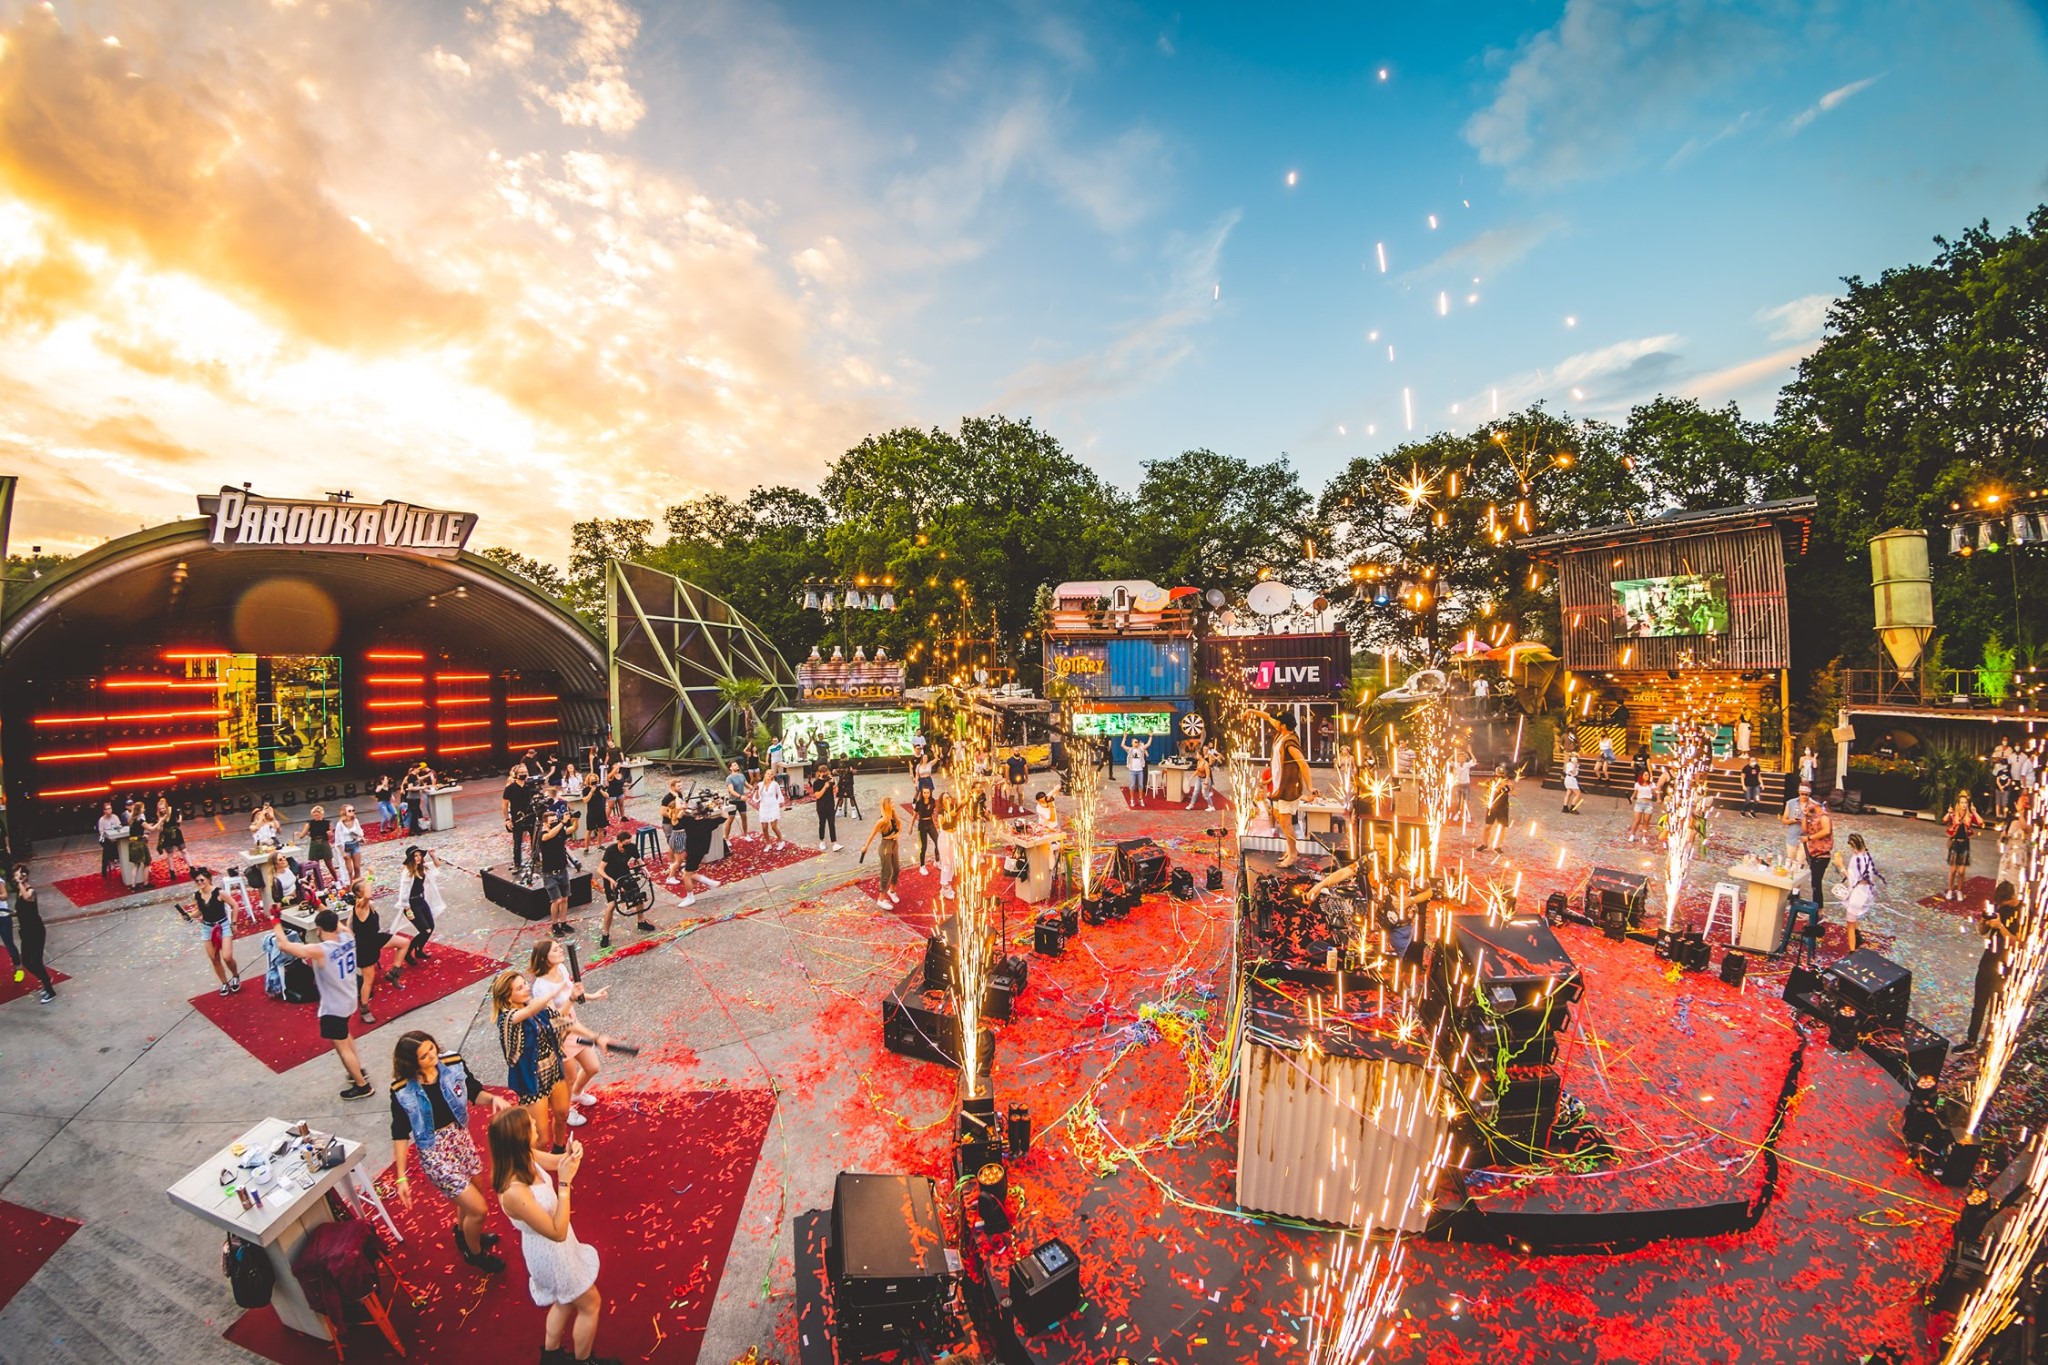 PAROOKAVILLE – LIVE from the City 1